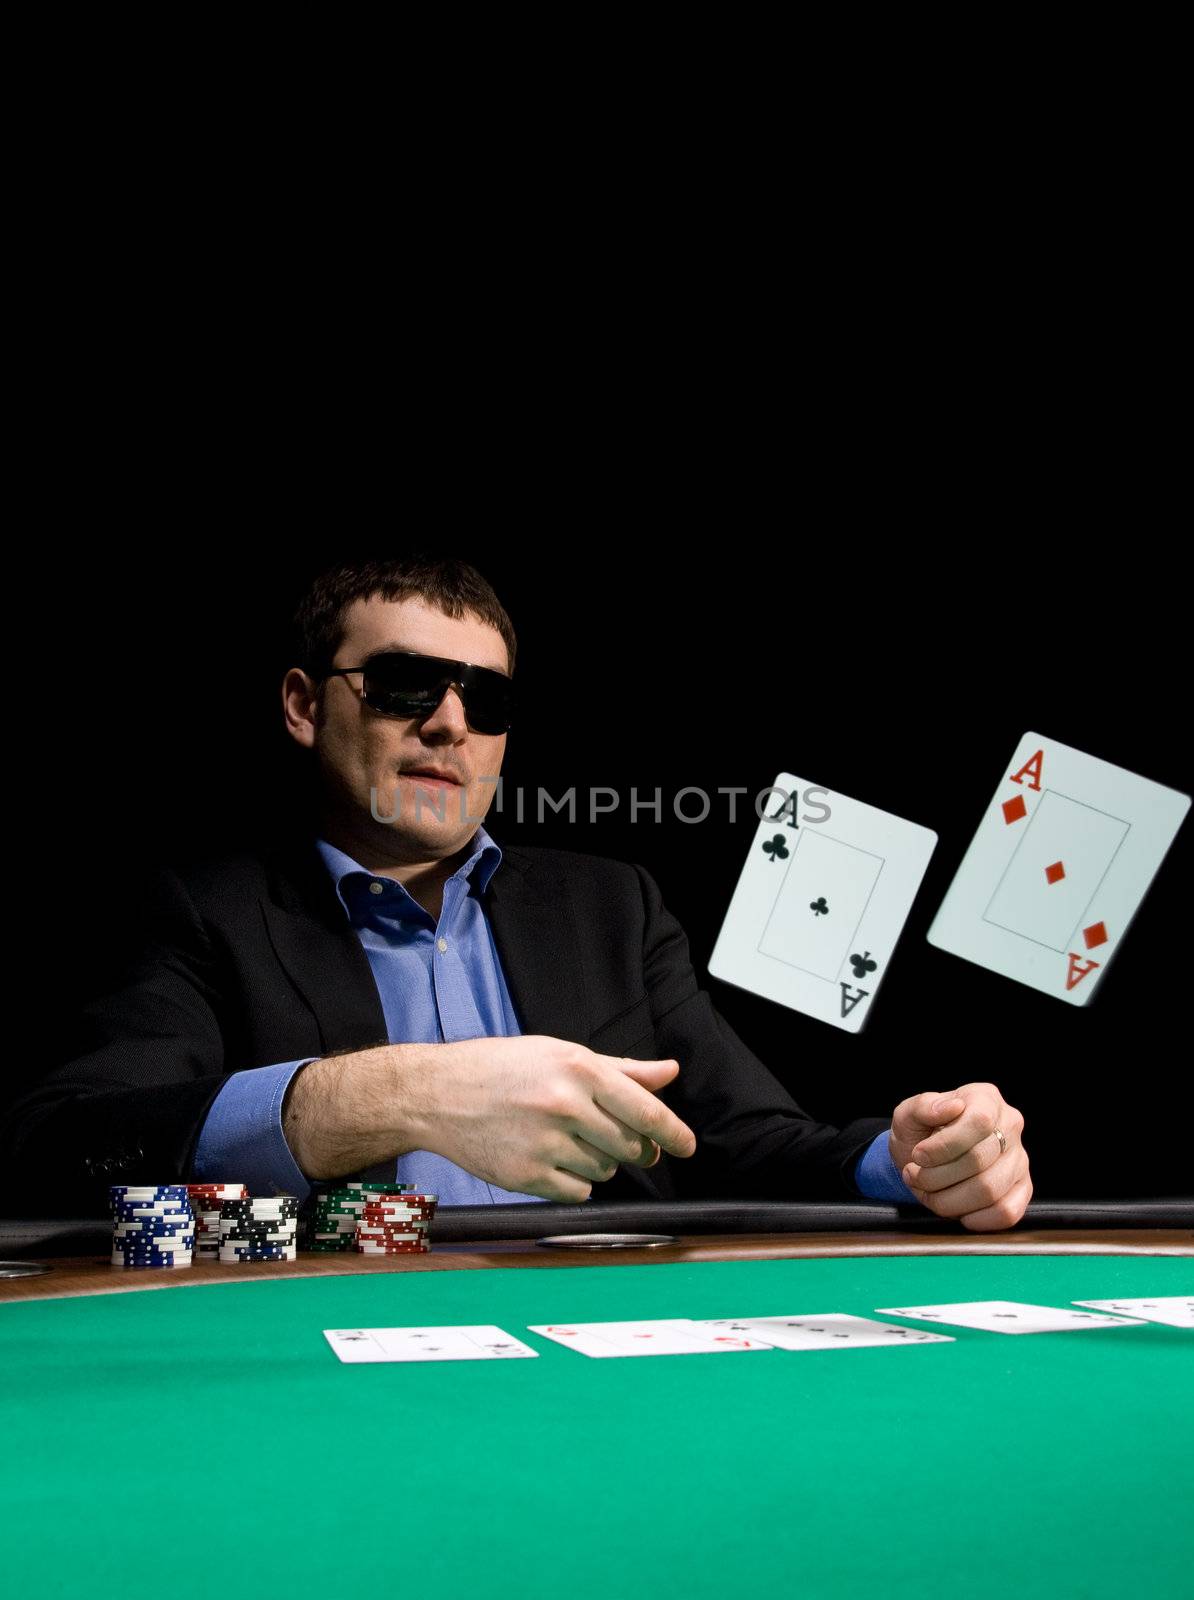 Stylish man in black suit folds two aces in casino poker at Las Vegas